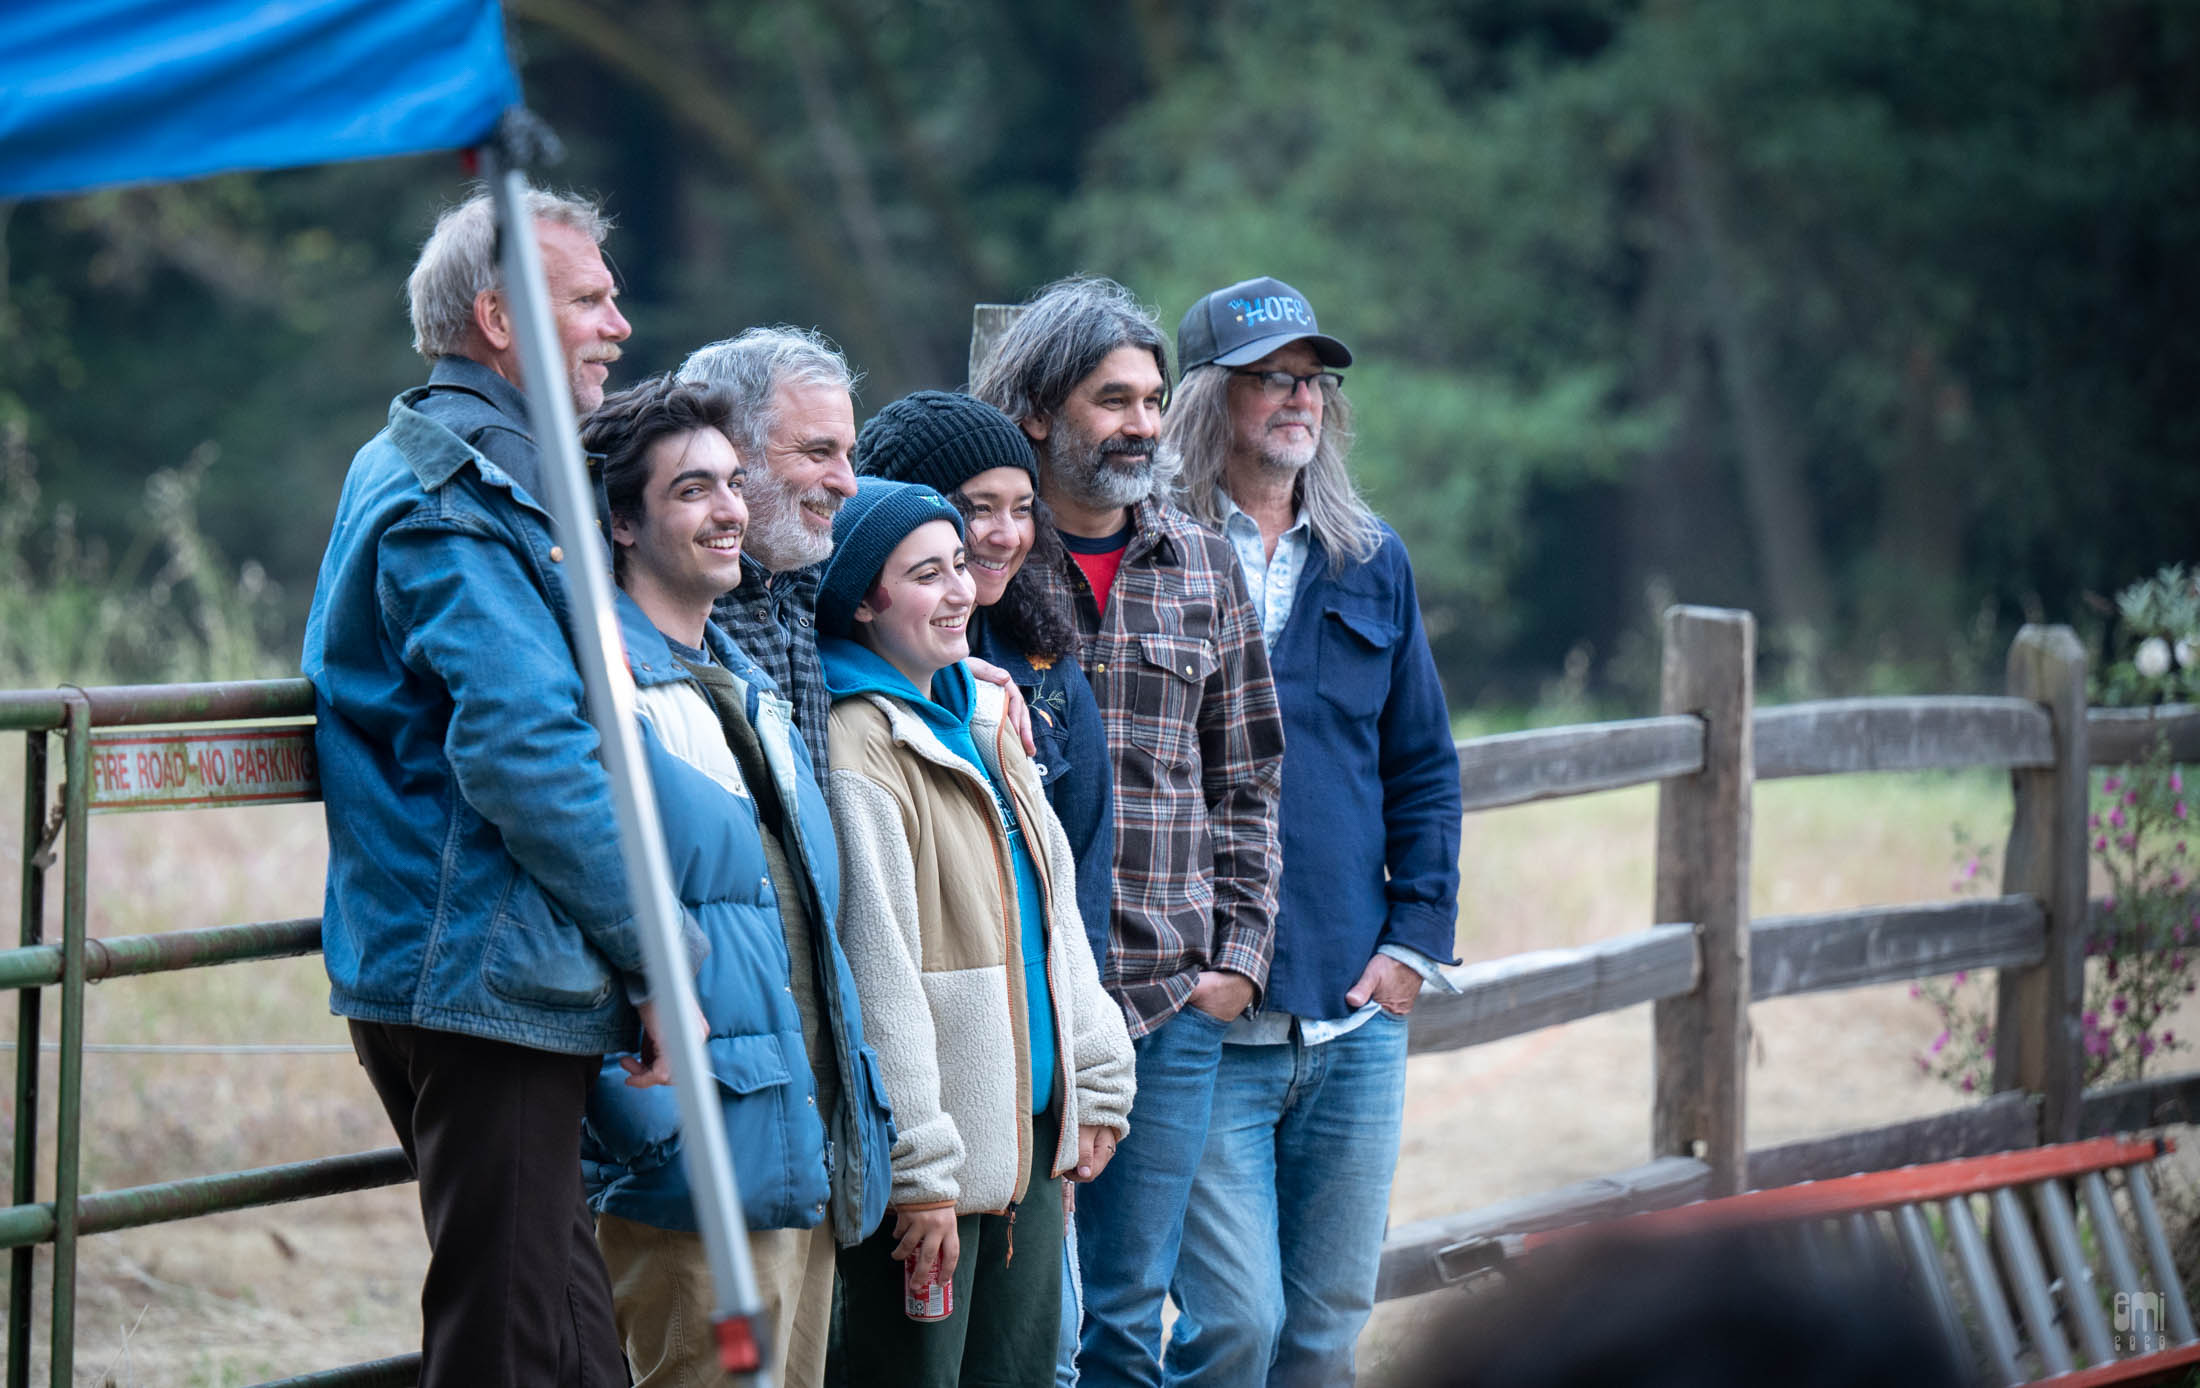 2023.5.20 HIPNIC XIV - MOTHER HIPS at Fernwood, Campground and Resort Big Sur CA. photo by emi